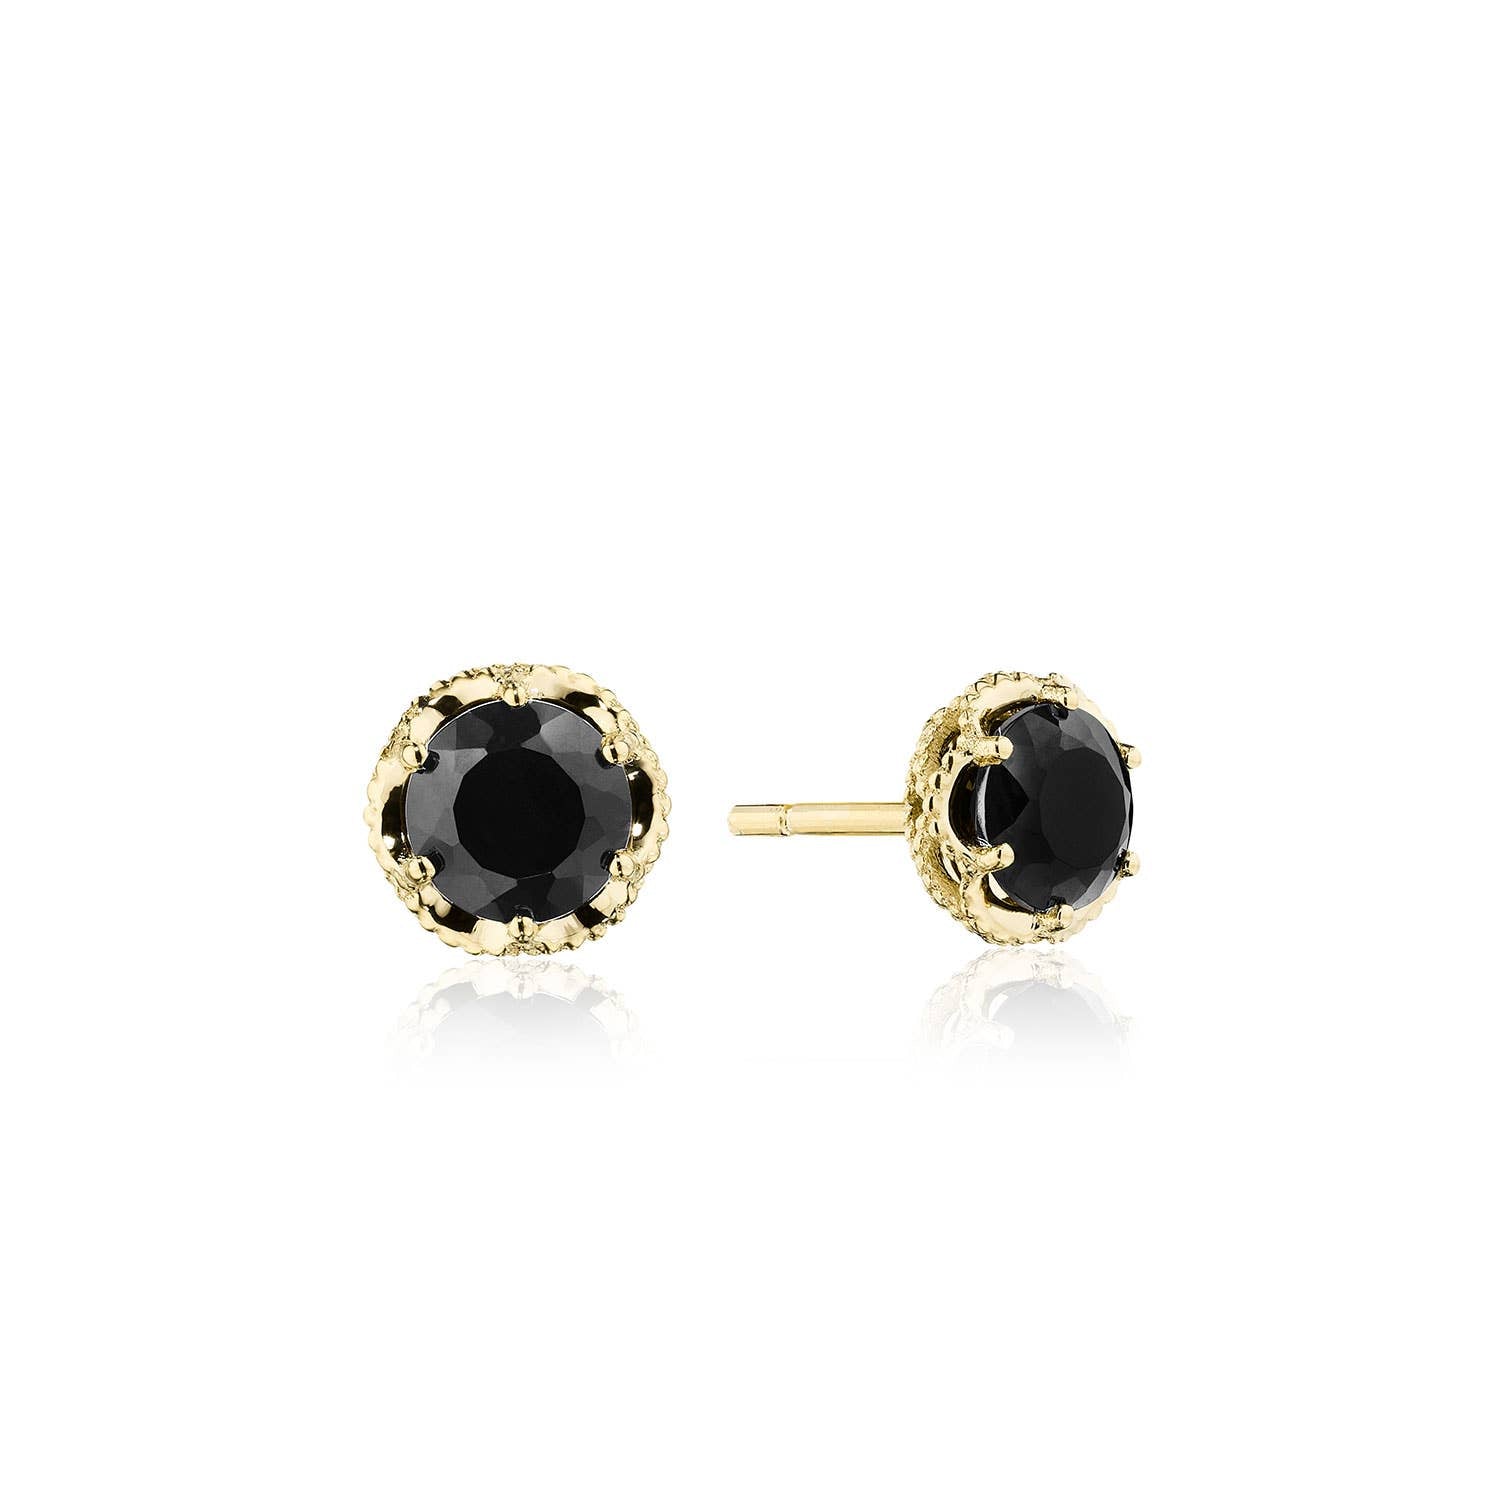 Petite Crescent Crown Studs featuring Black Onyx and Yellow Gold